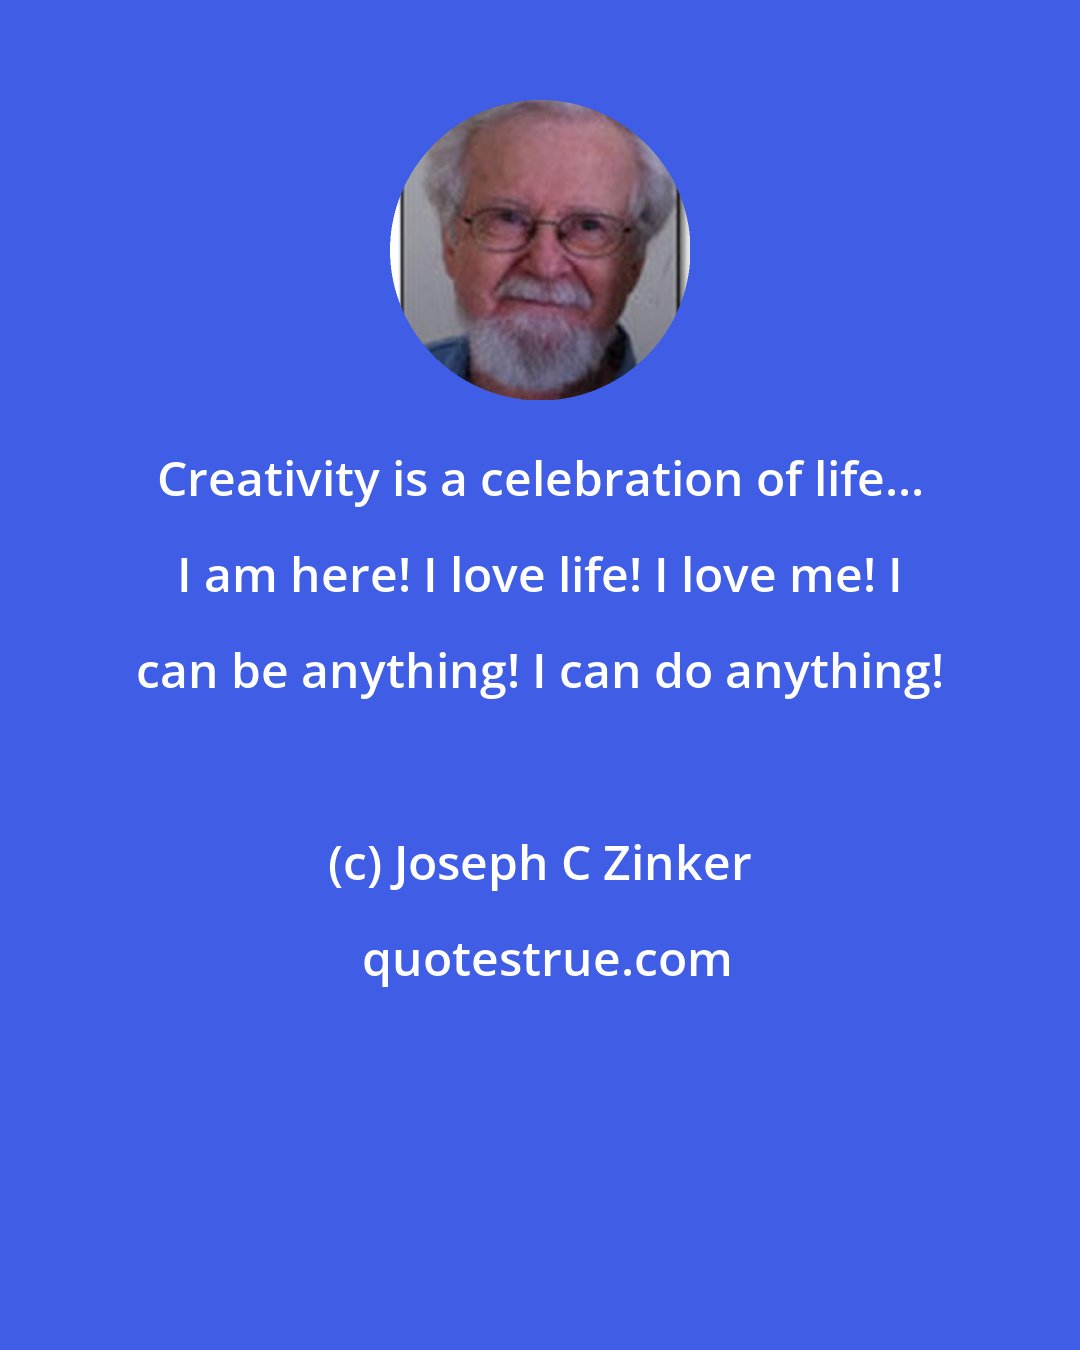 Joseph C Zinker: Creativity is a celebration of life... I am here! I love life! I love me! I can be anything! I can do anything!